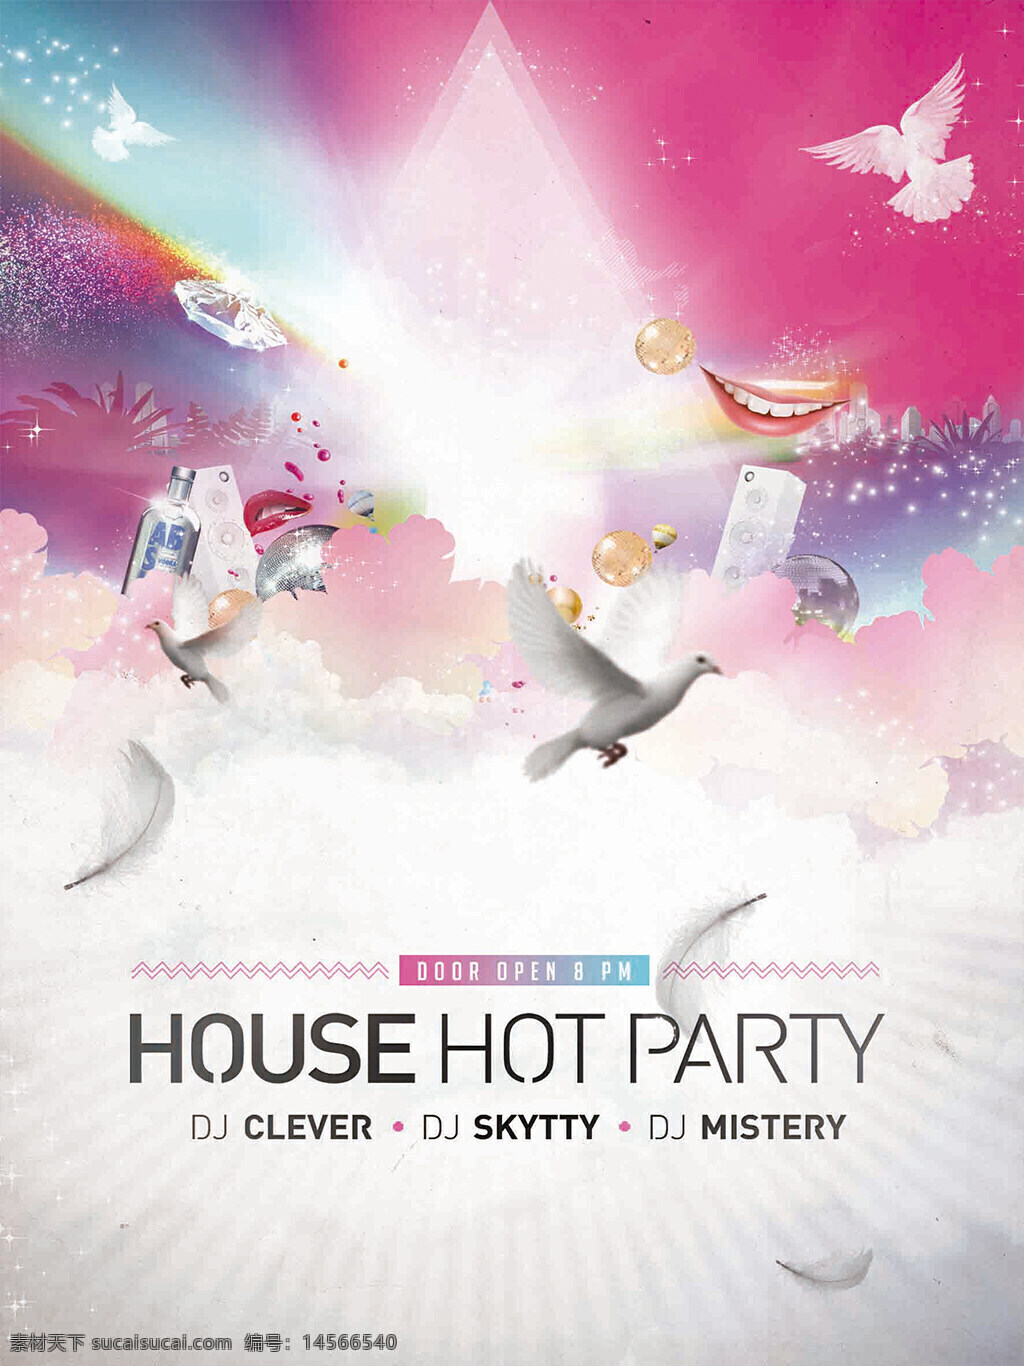 house hot party展架海报背景 party 展架设计 海报设计背景 羽毛 云 鸽子